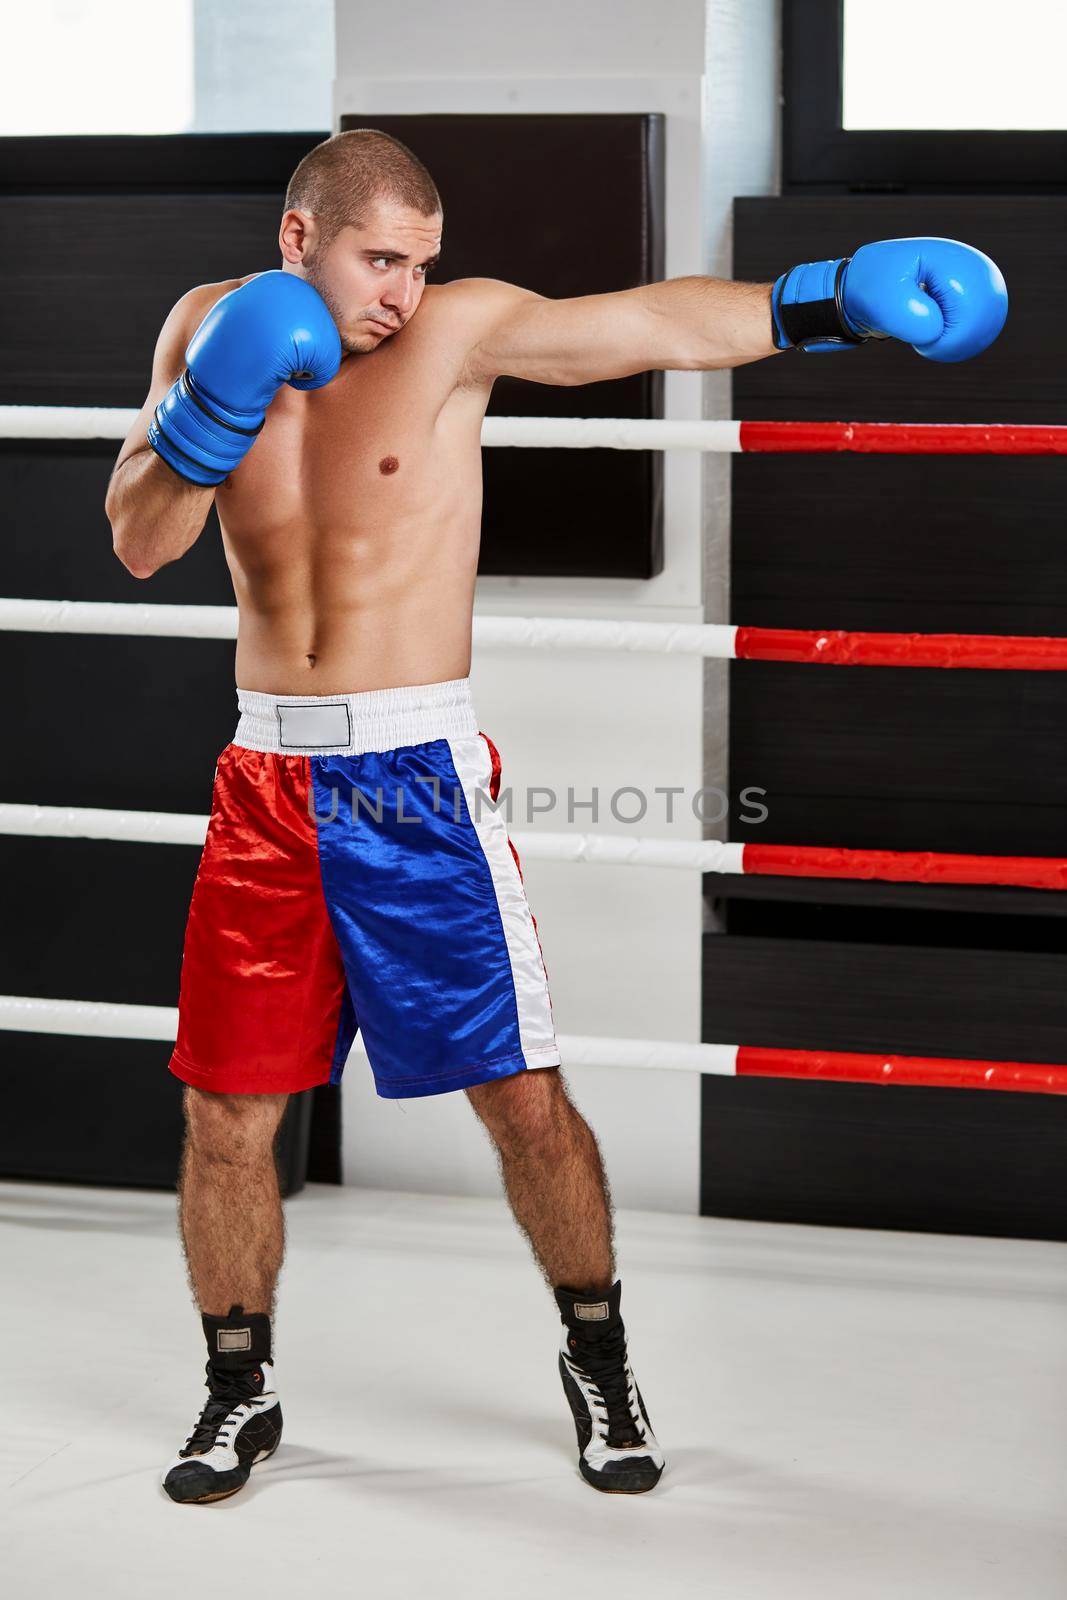 Boxer in blue gloves warming up in the ring by nazarovsergey